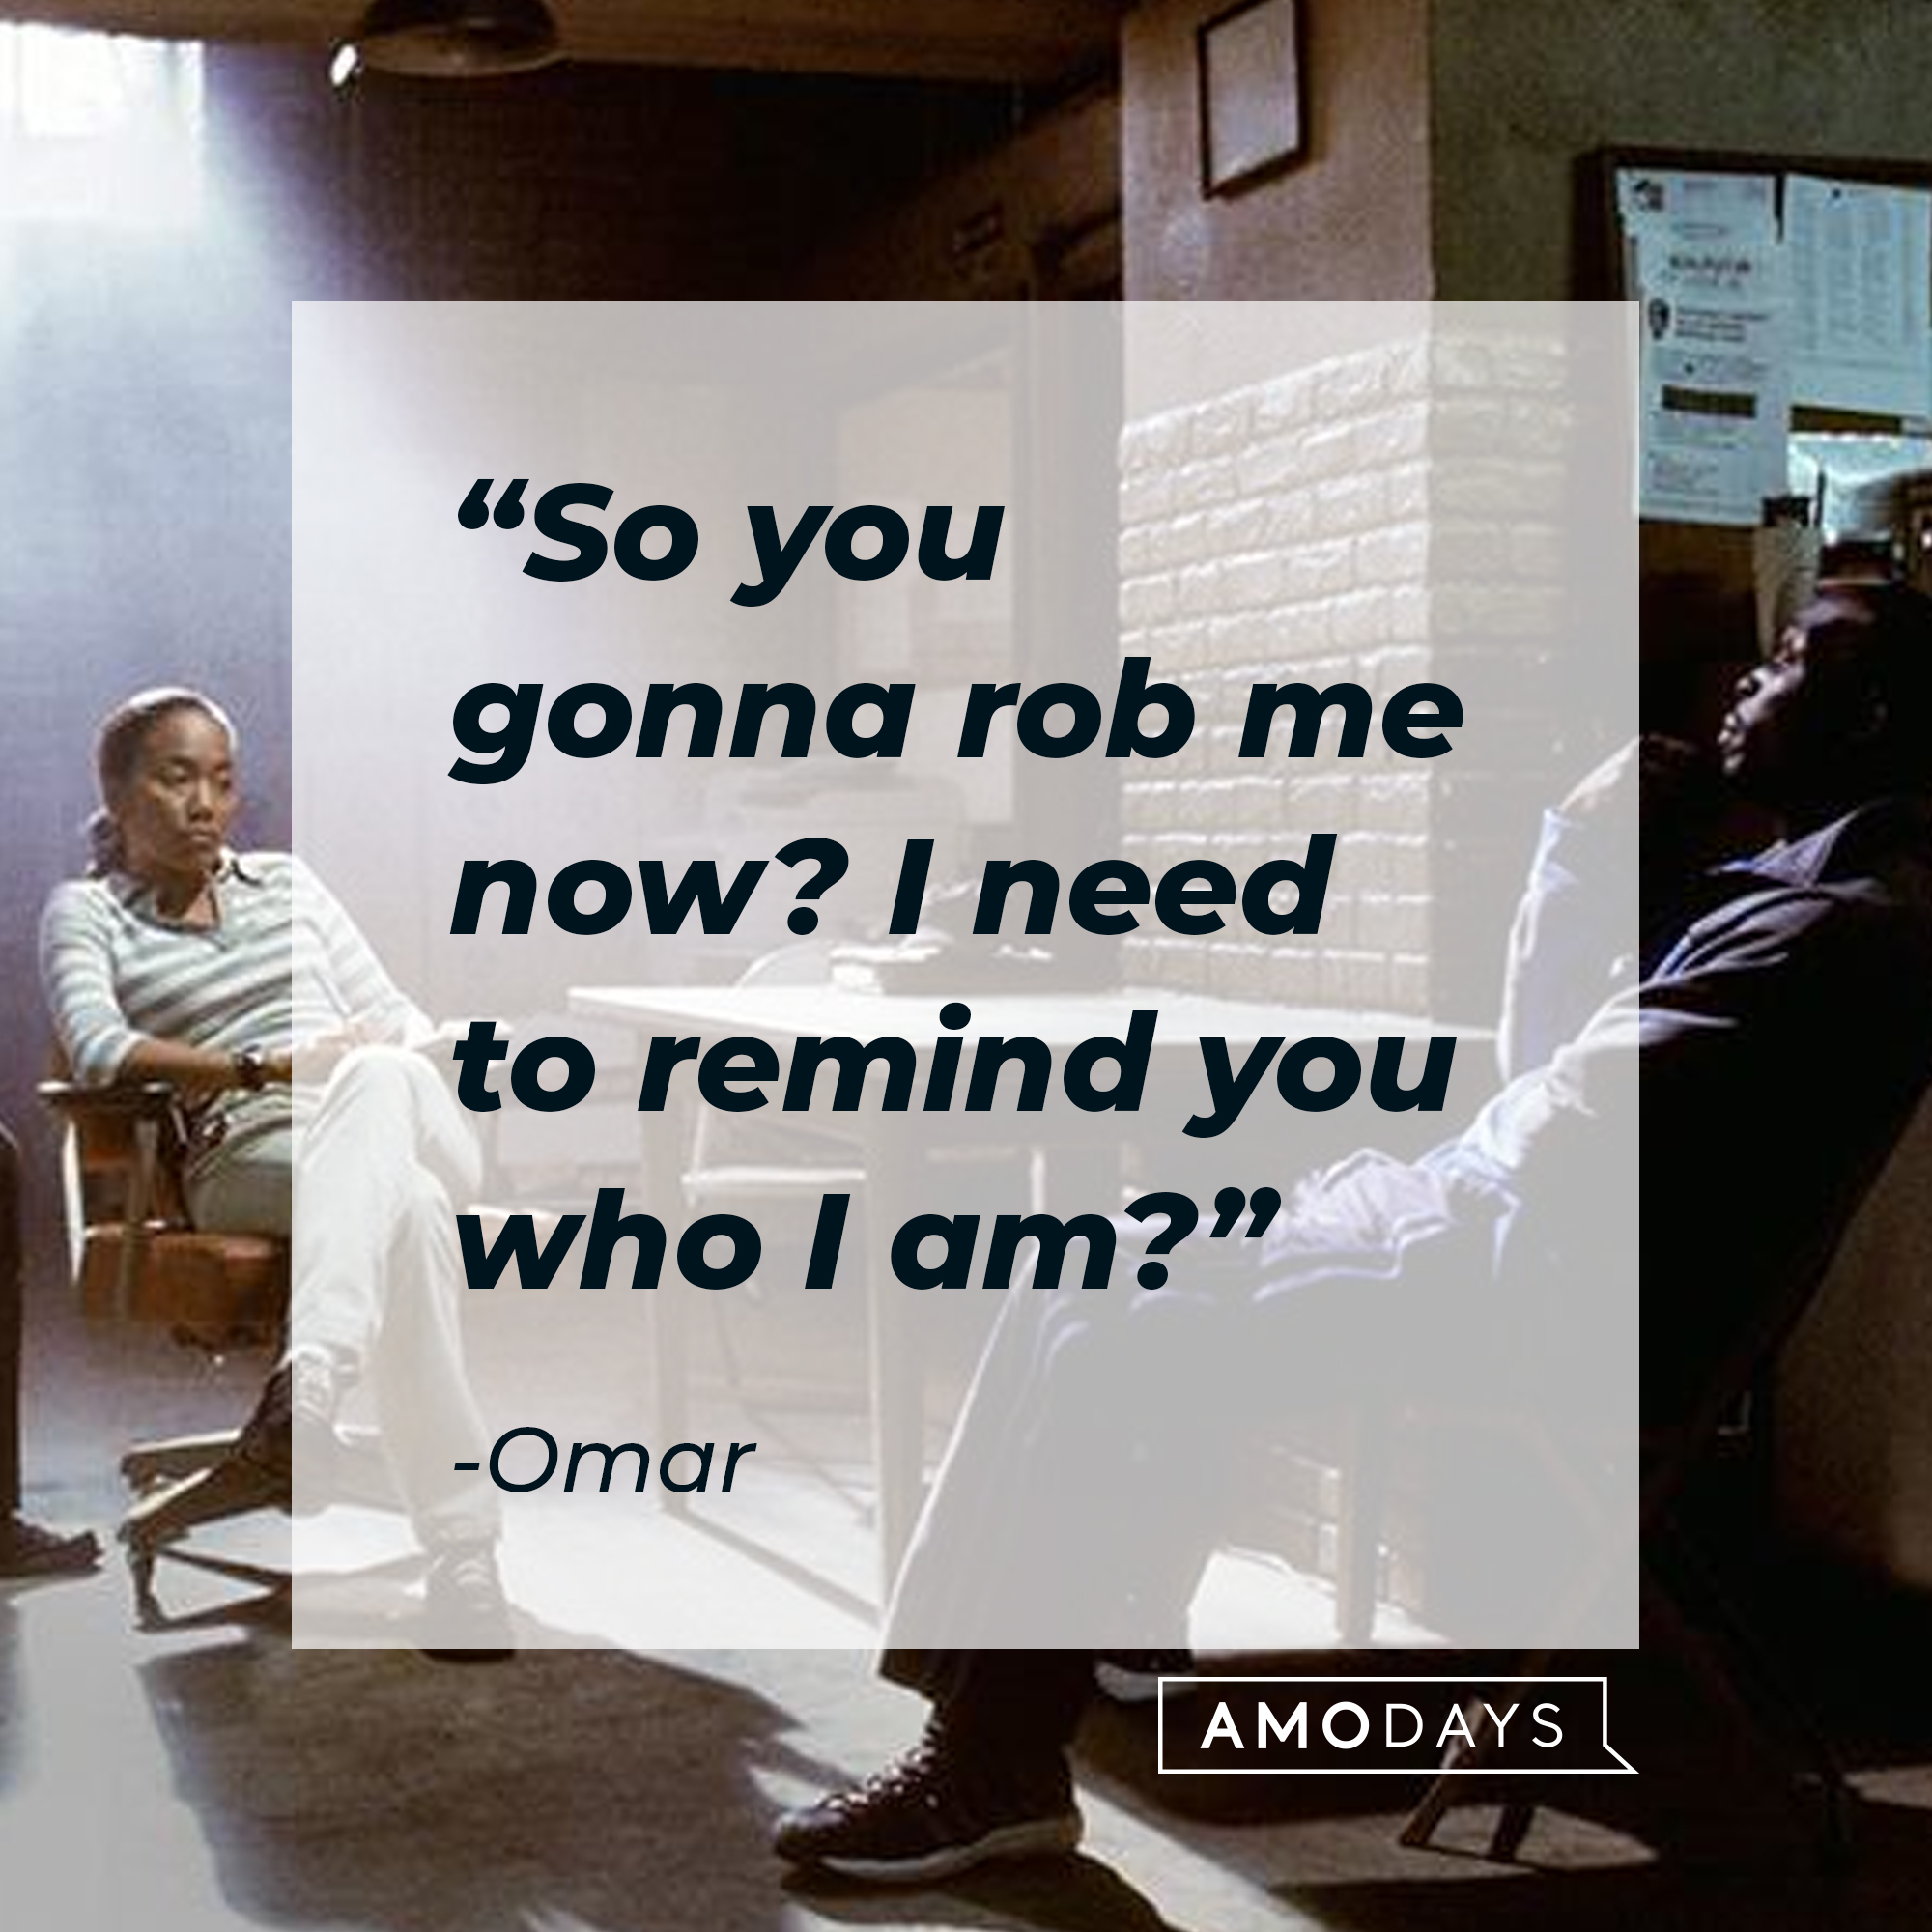 Omar's quote: "So you gonna rob me now? I need to remind you who I am?" | Source: facebook.com/TheWire